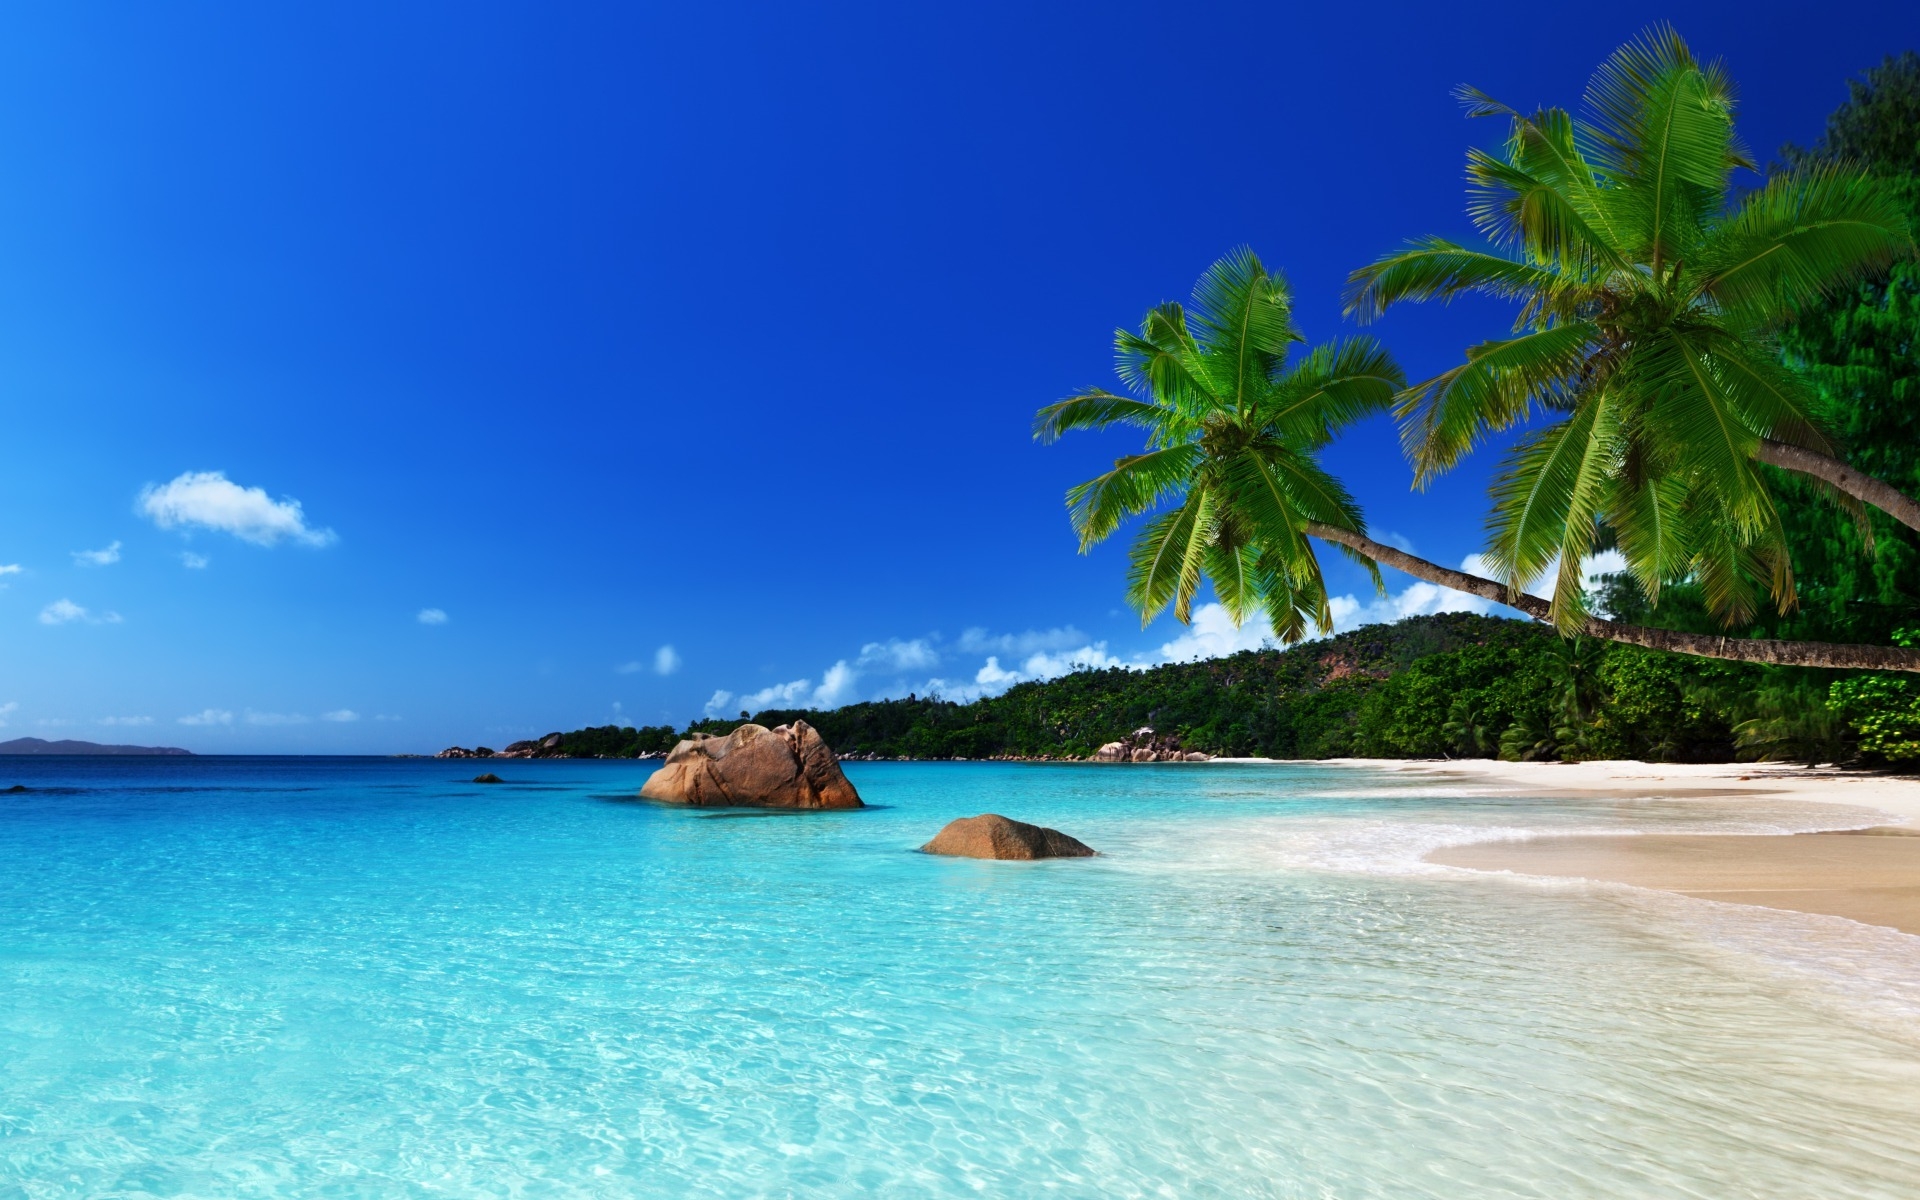 Tropical Island Wallpapers